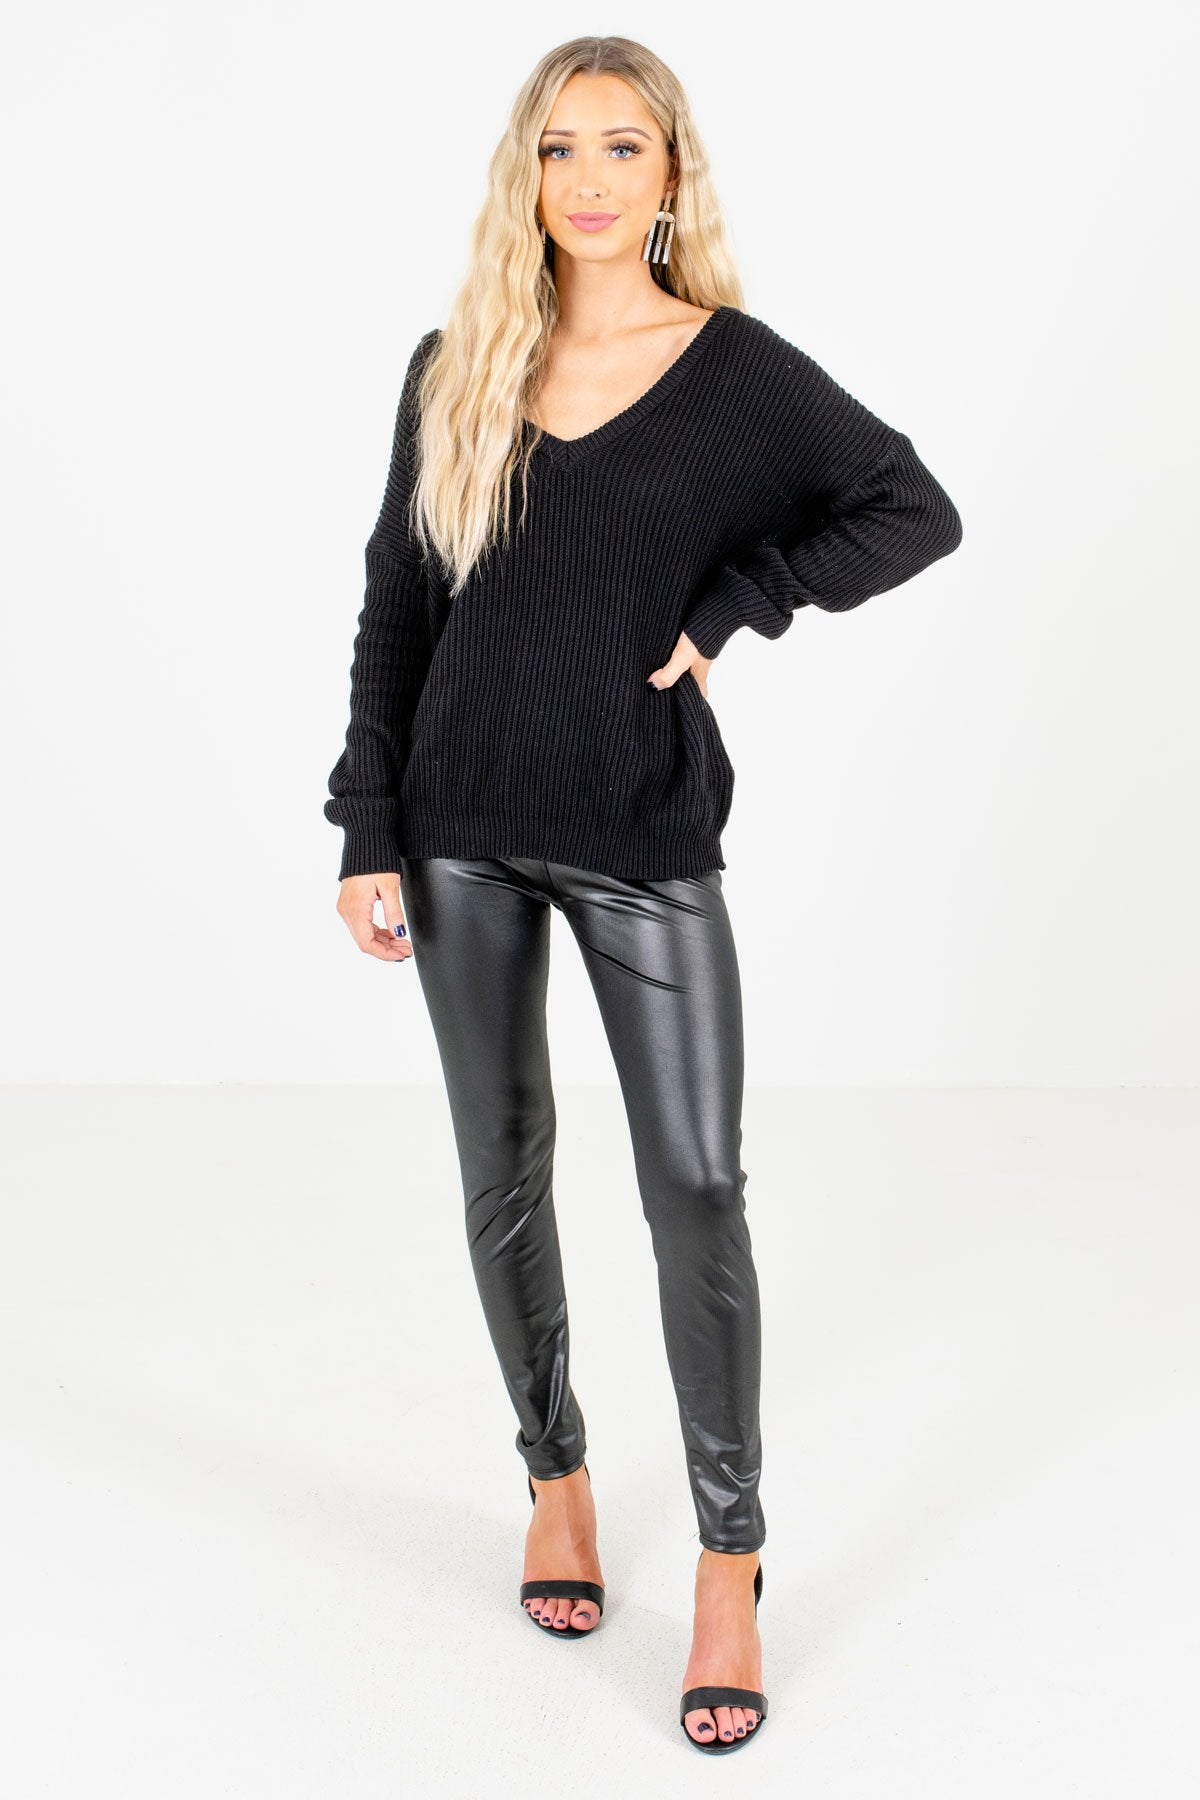 Women's Black Warm and Cozy Boutique Sweater